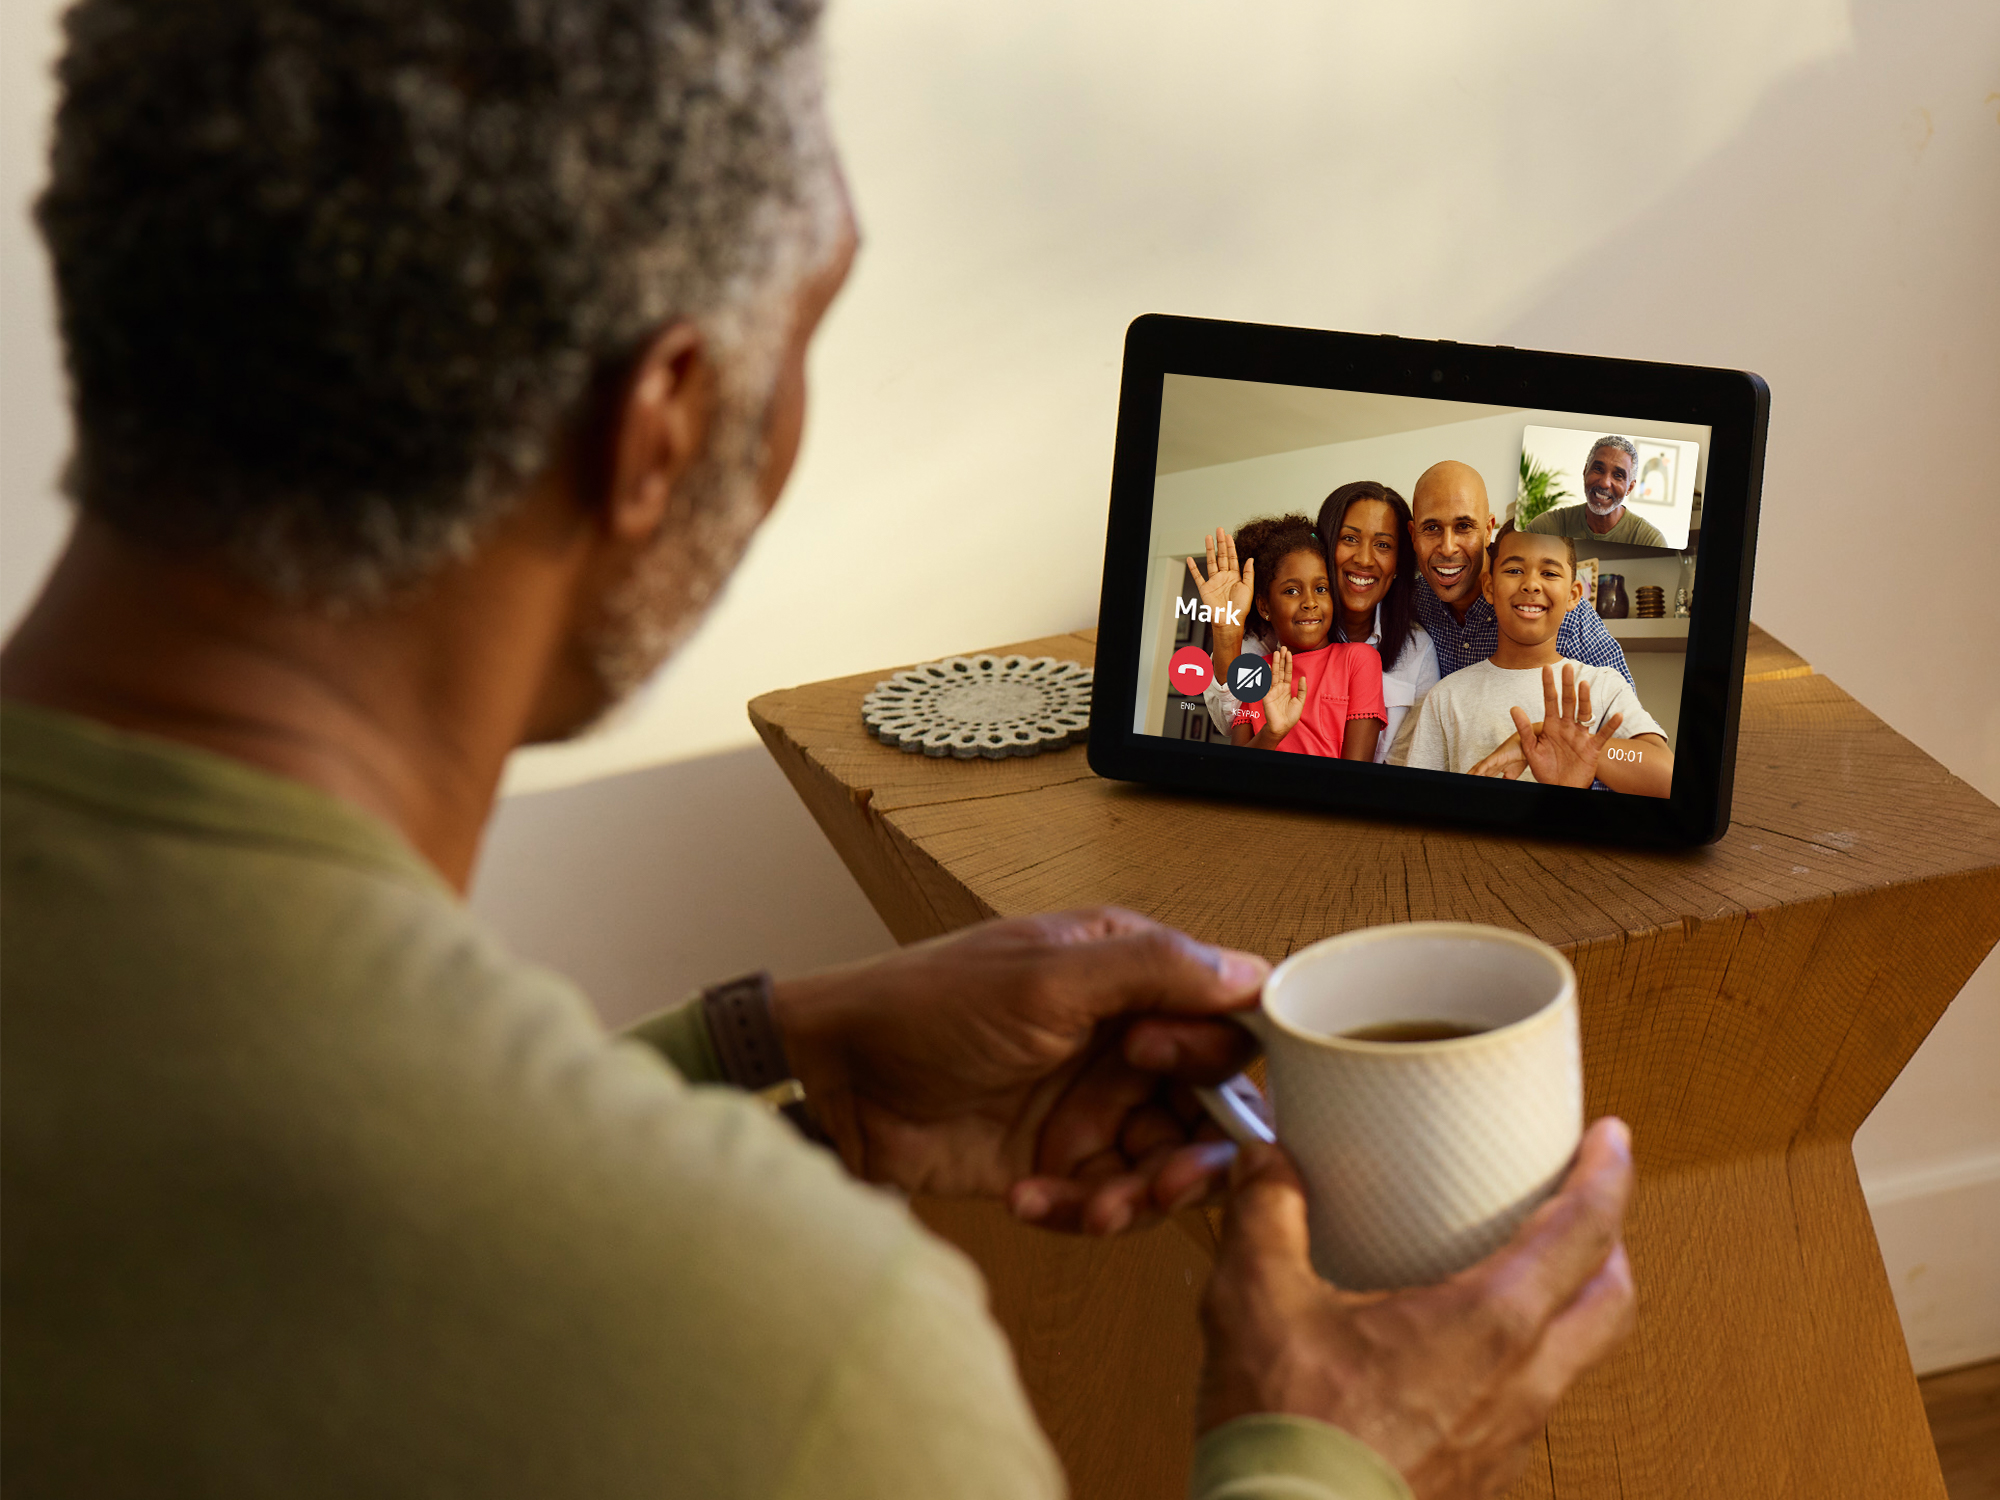 Image shows the Echo Show on a table with a group of people speaking and the back of the person talking to them